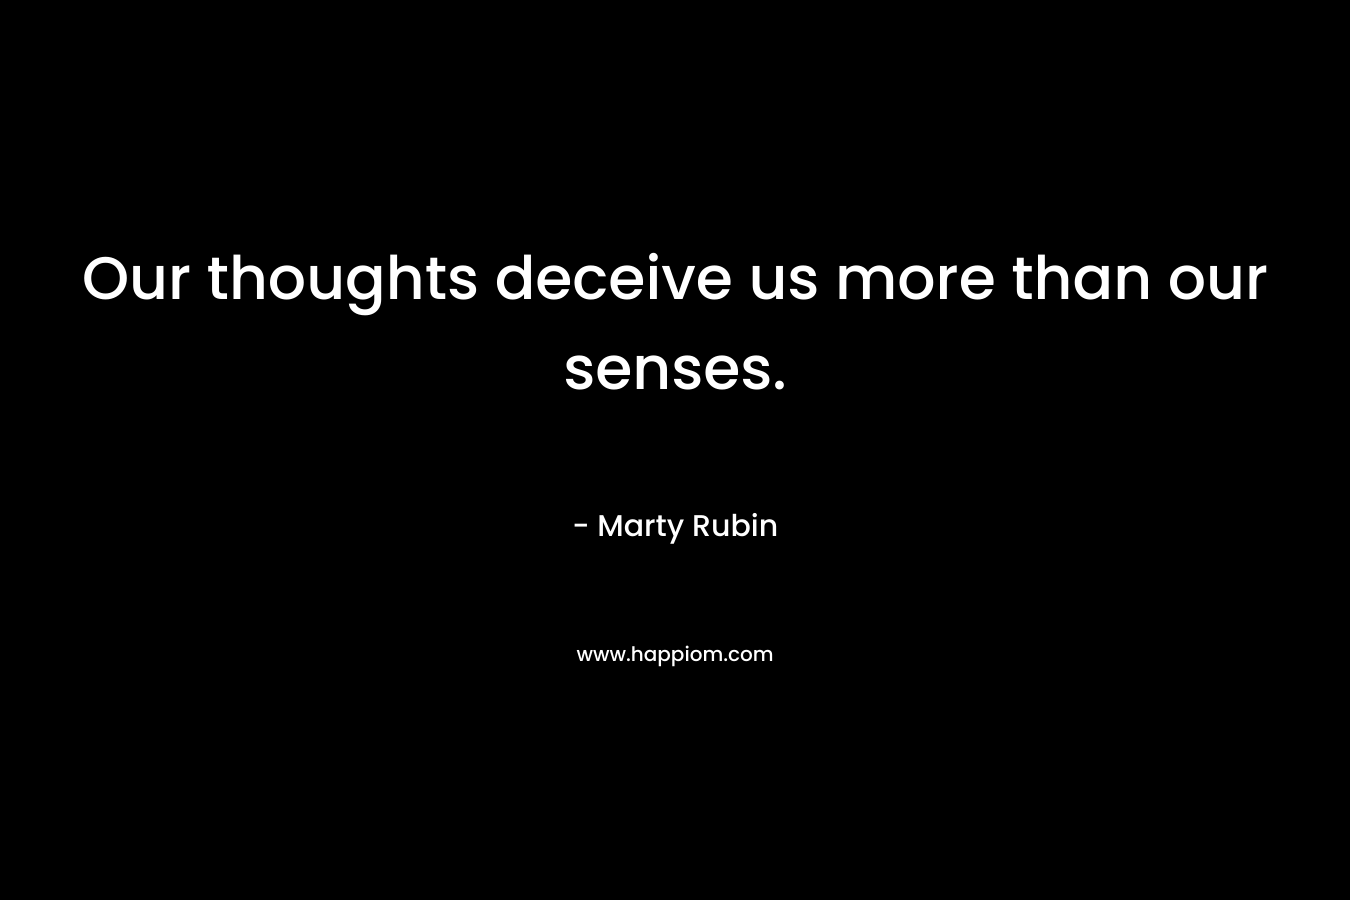 Our thoughts deceive us more than our senses.